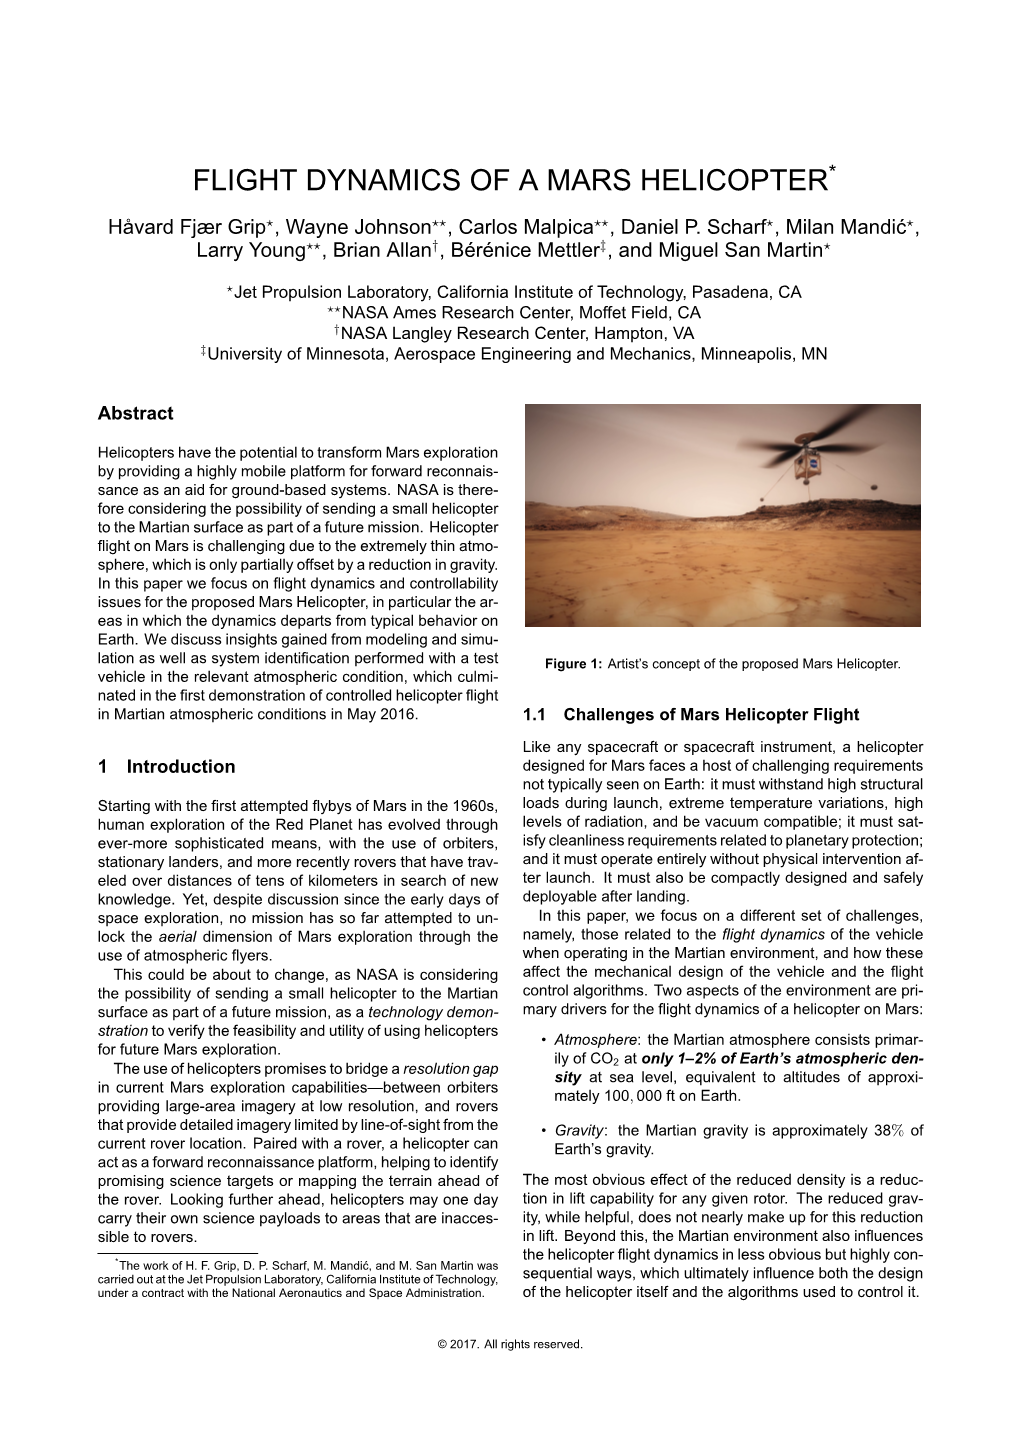 Flight Dynamics of a Mars Helicopter*